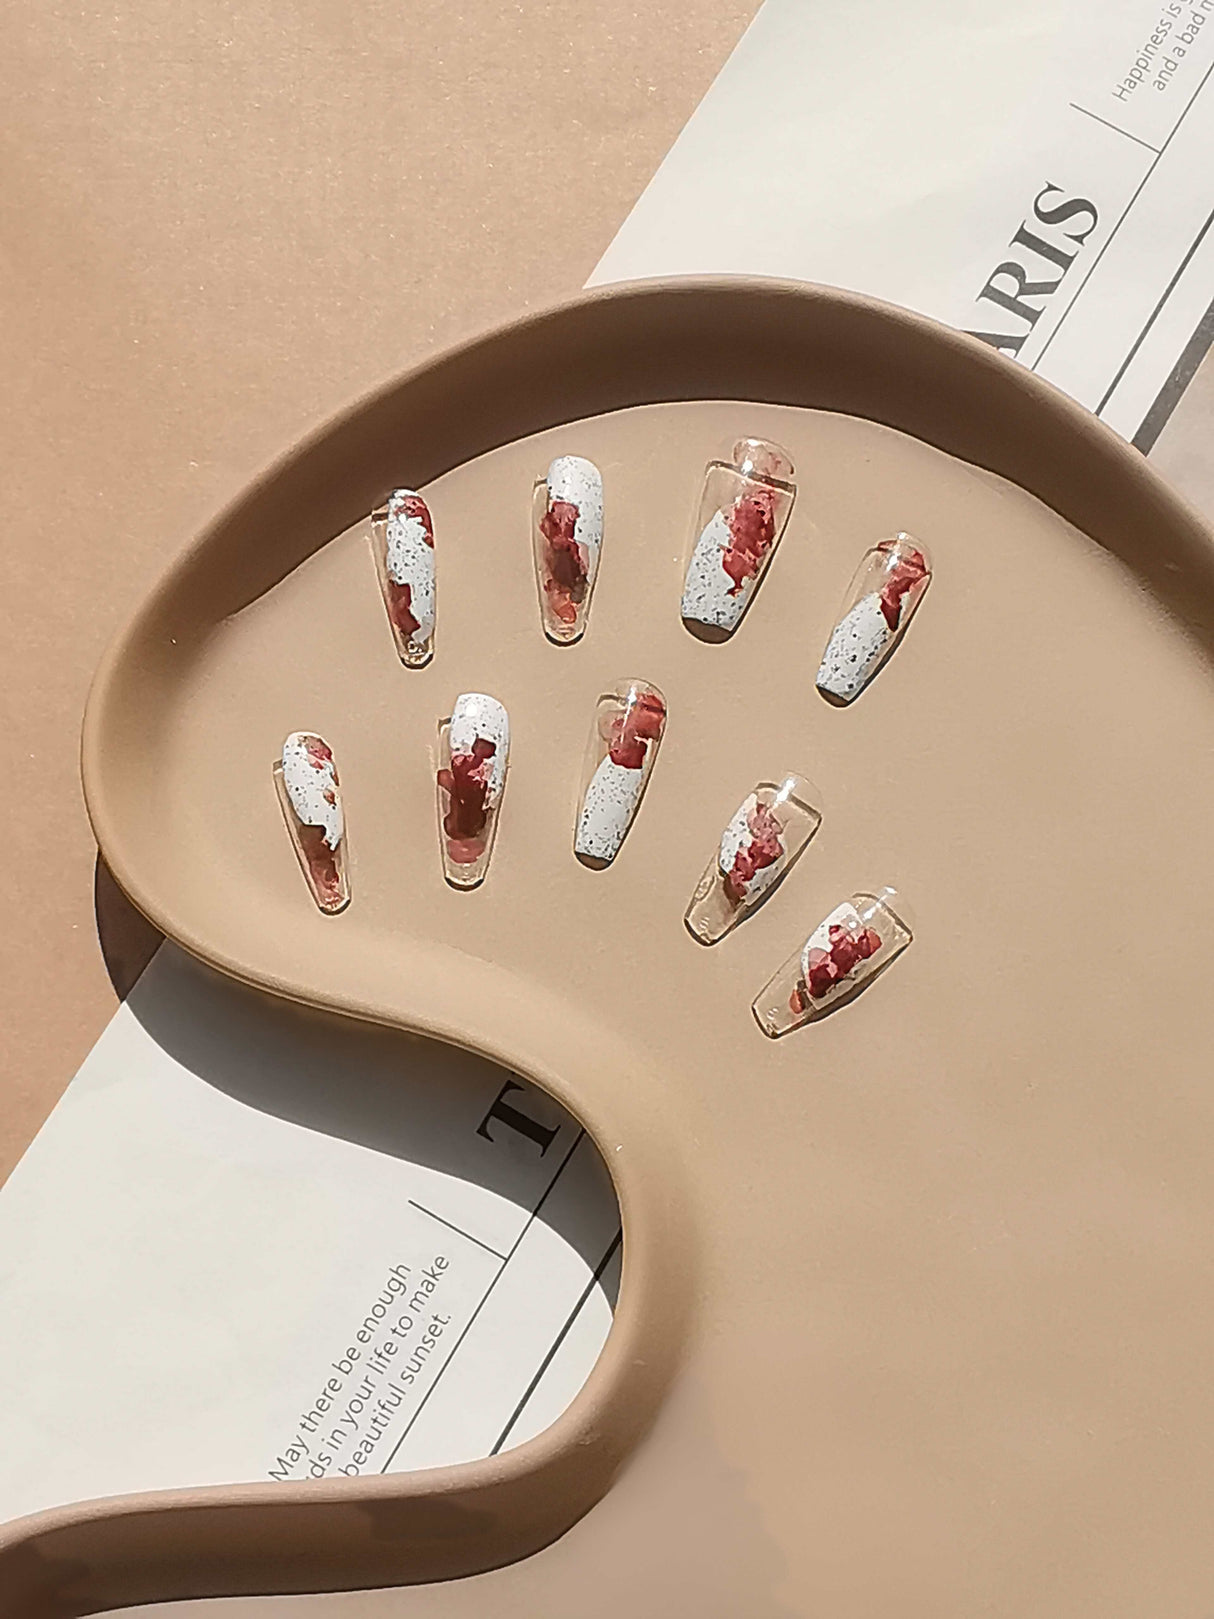 These press-on nails are for fashion-forward individuals. The design is artistic and modern, with a clear base and splatter or marbling effect in white and red. 